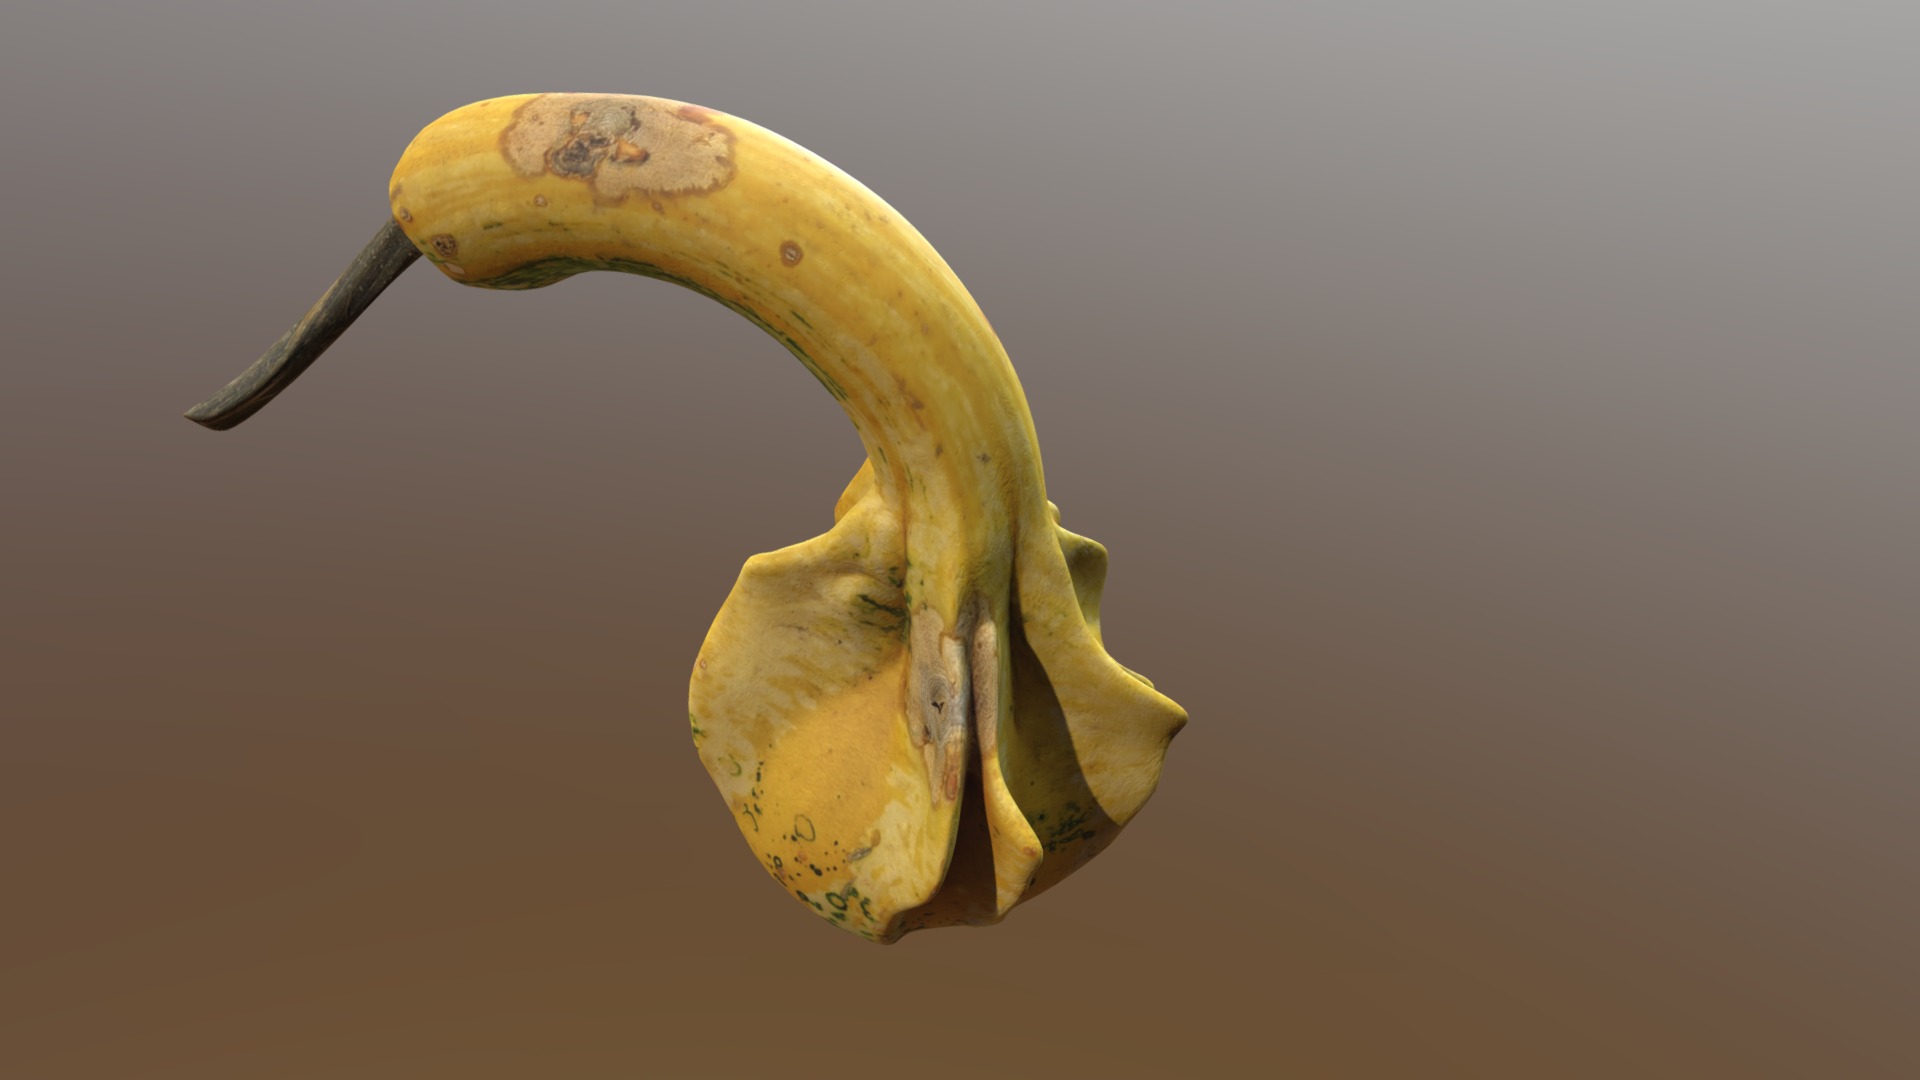 3D model pumpkin - This is a 3D model of the pumpkin. The 3D model is about a banana with a face.